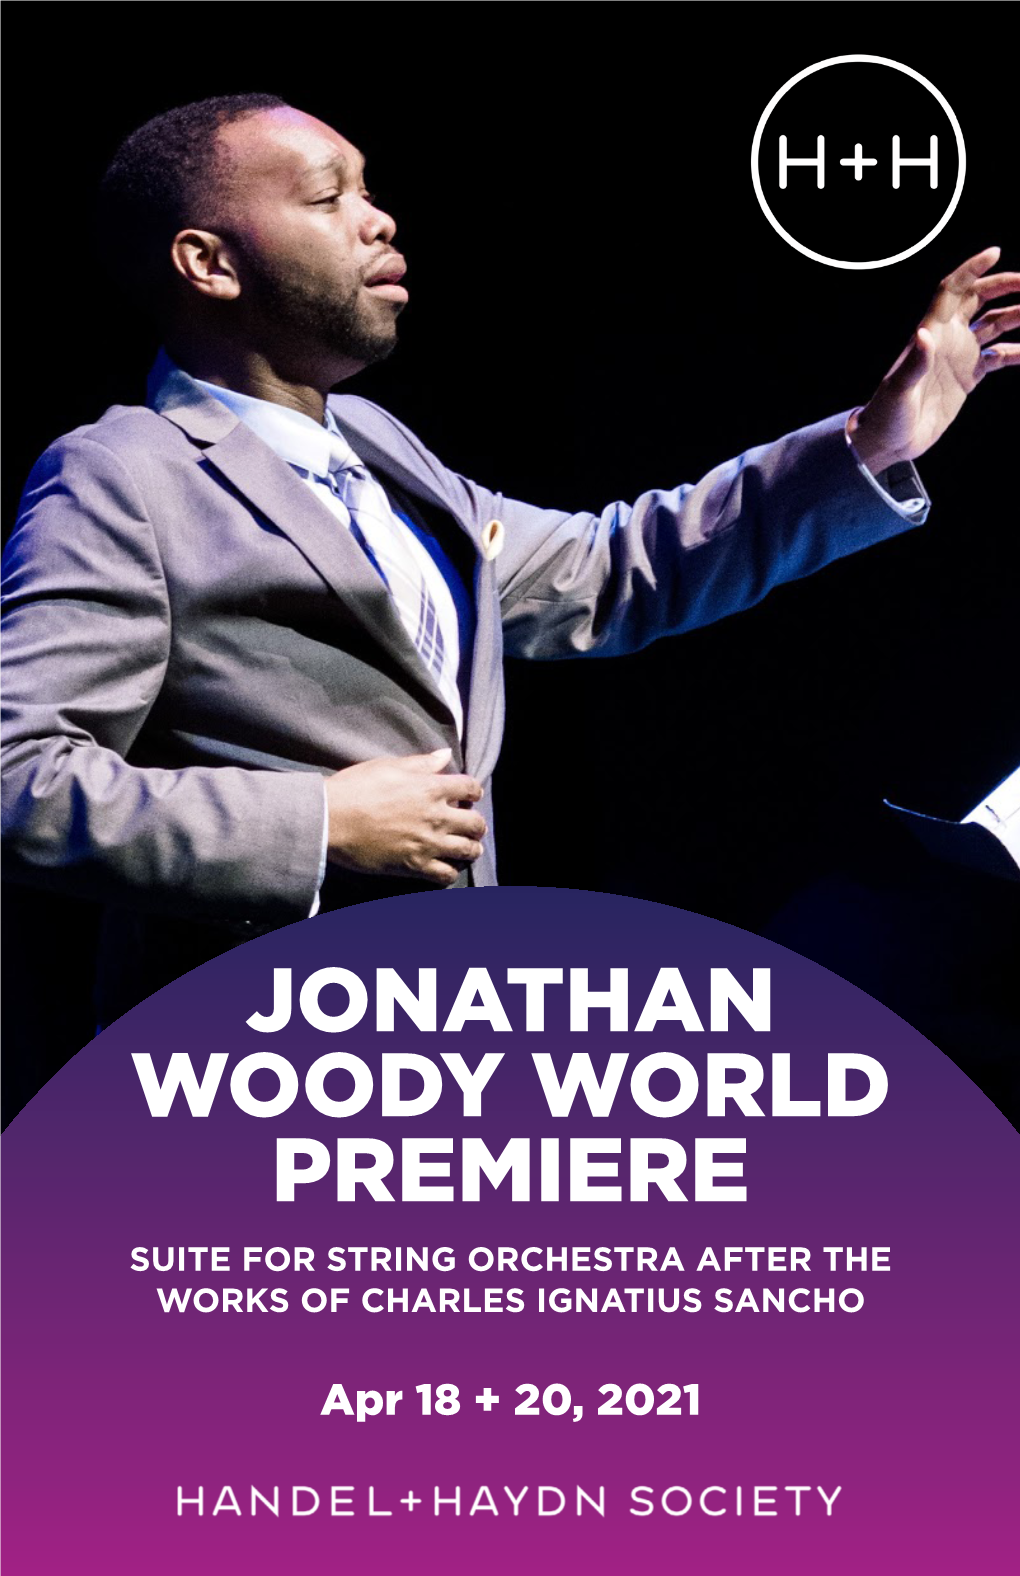 Jonathan Woody World Premiere Suite for String Orchestra After the Works of Charles Ignatius Sancho